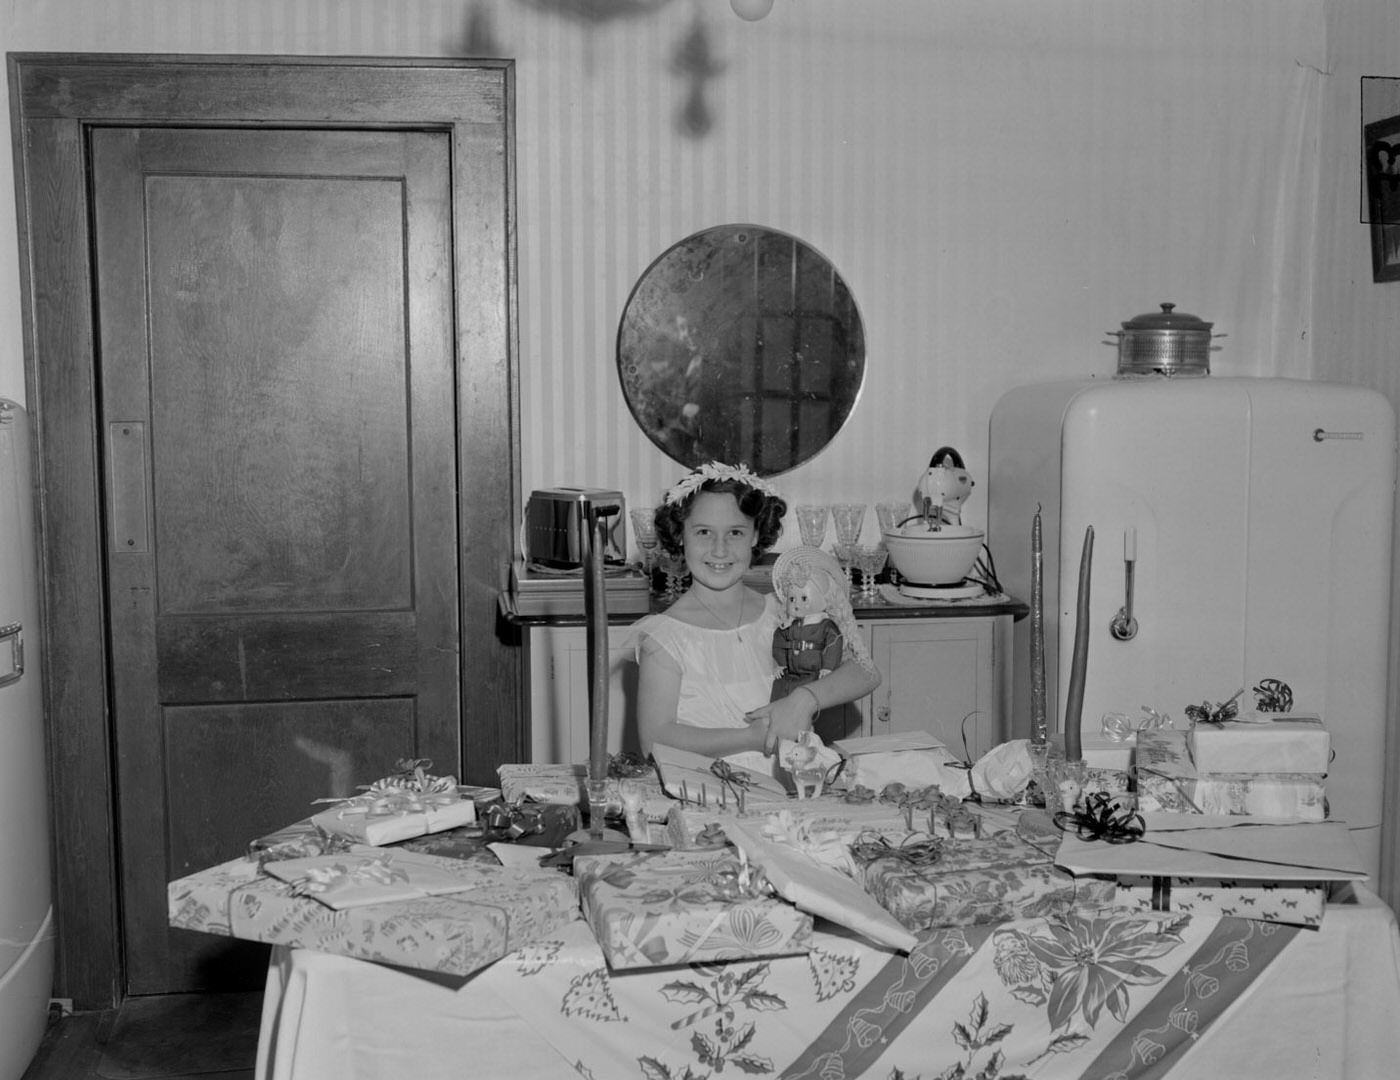 Young Girl with Doll in Front of Birthday Presents, 1951.